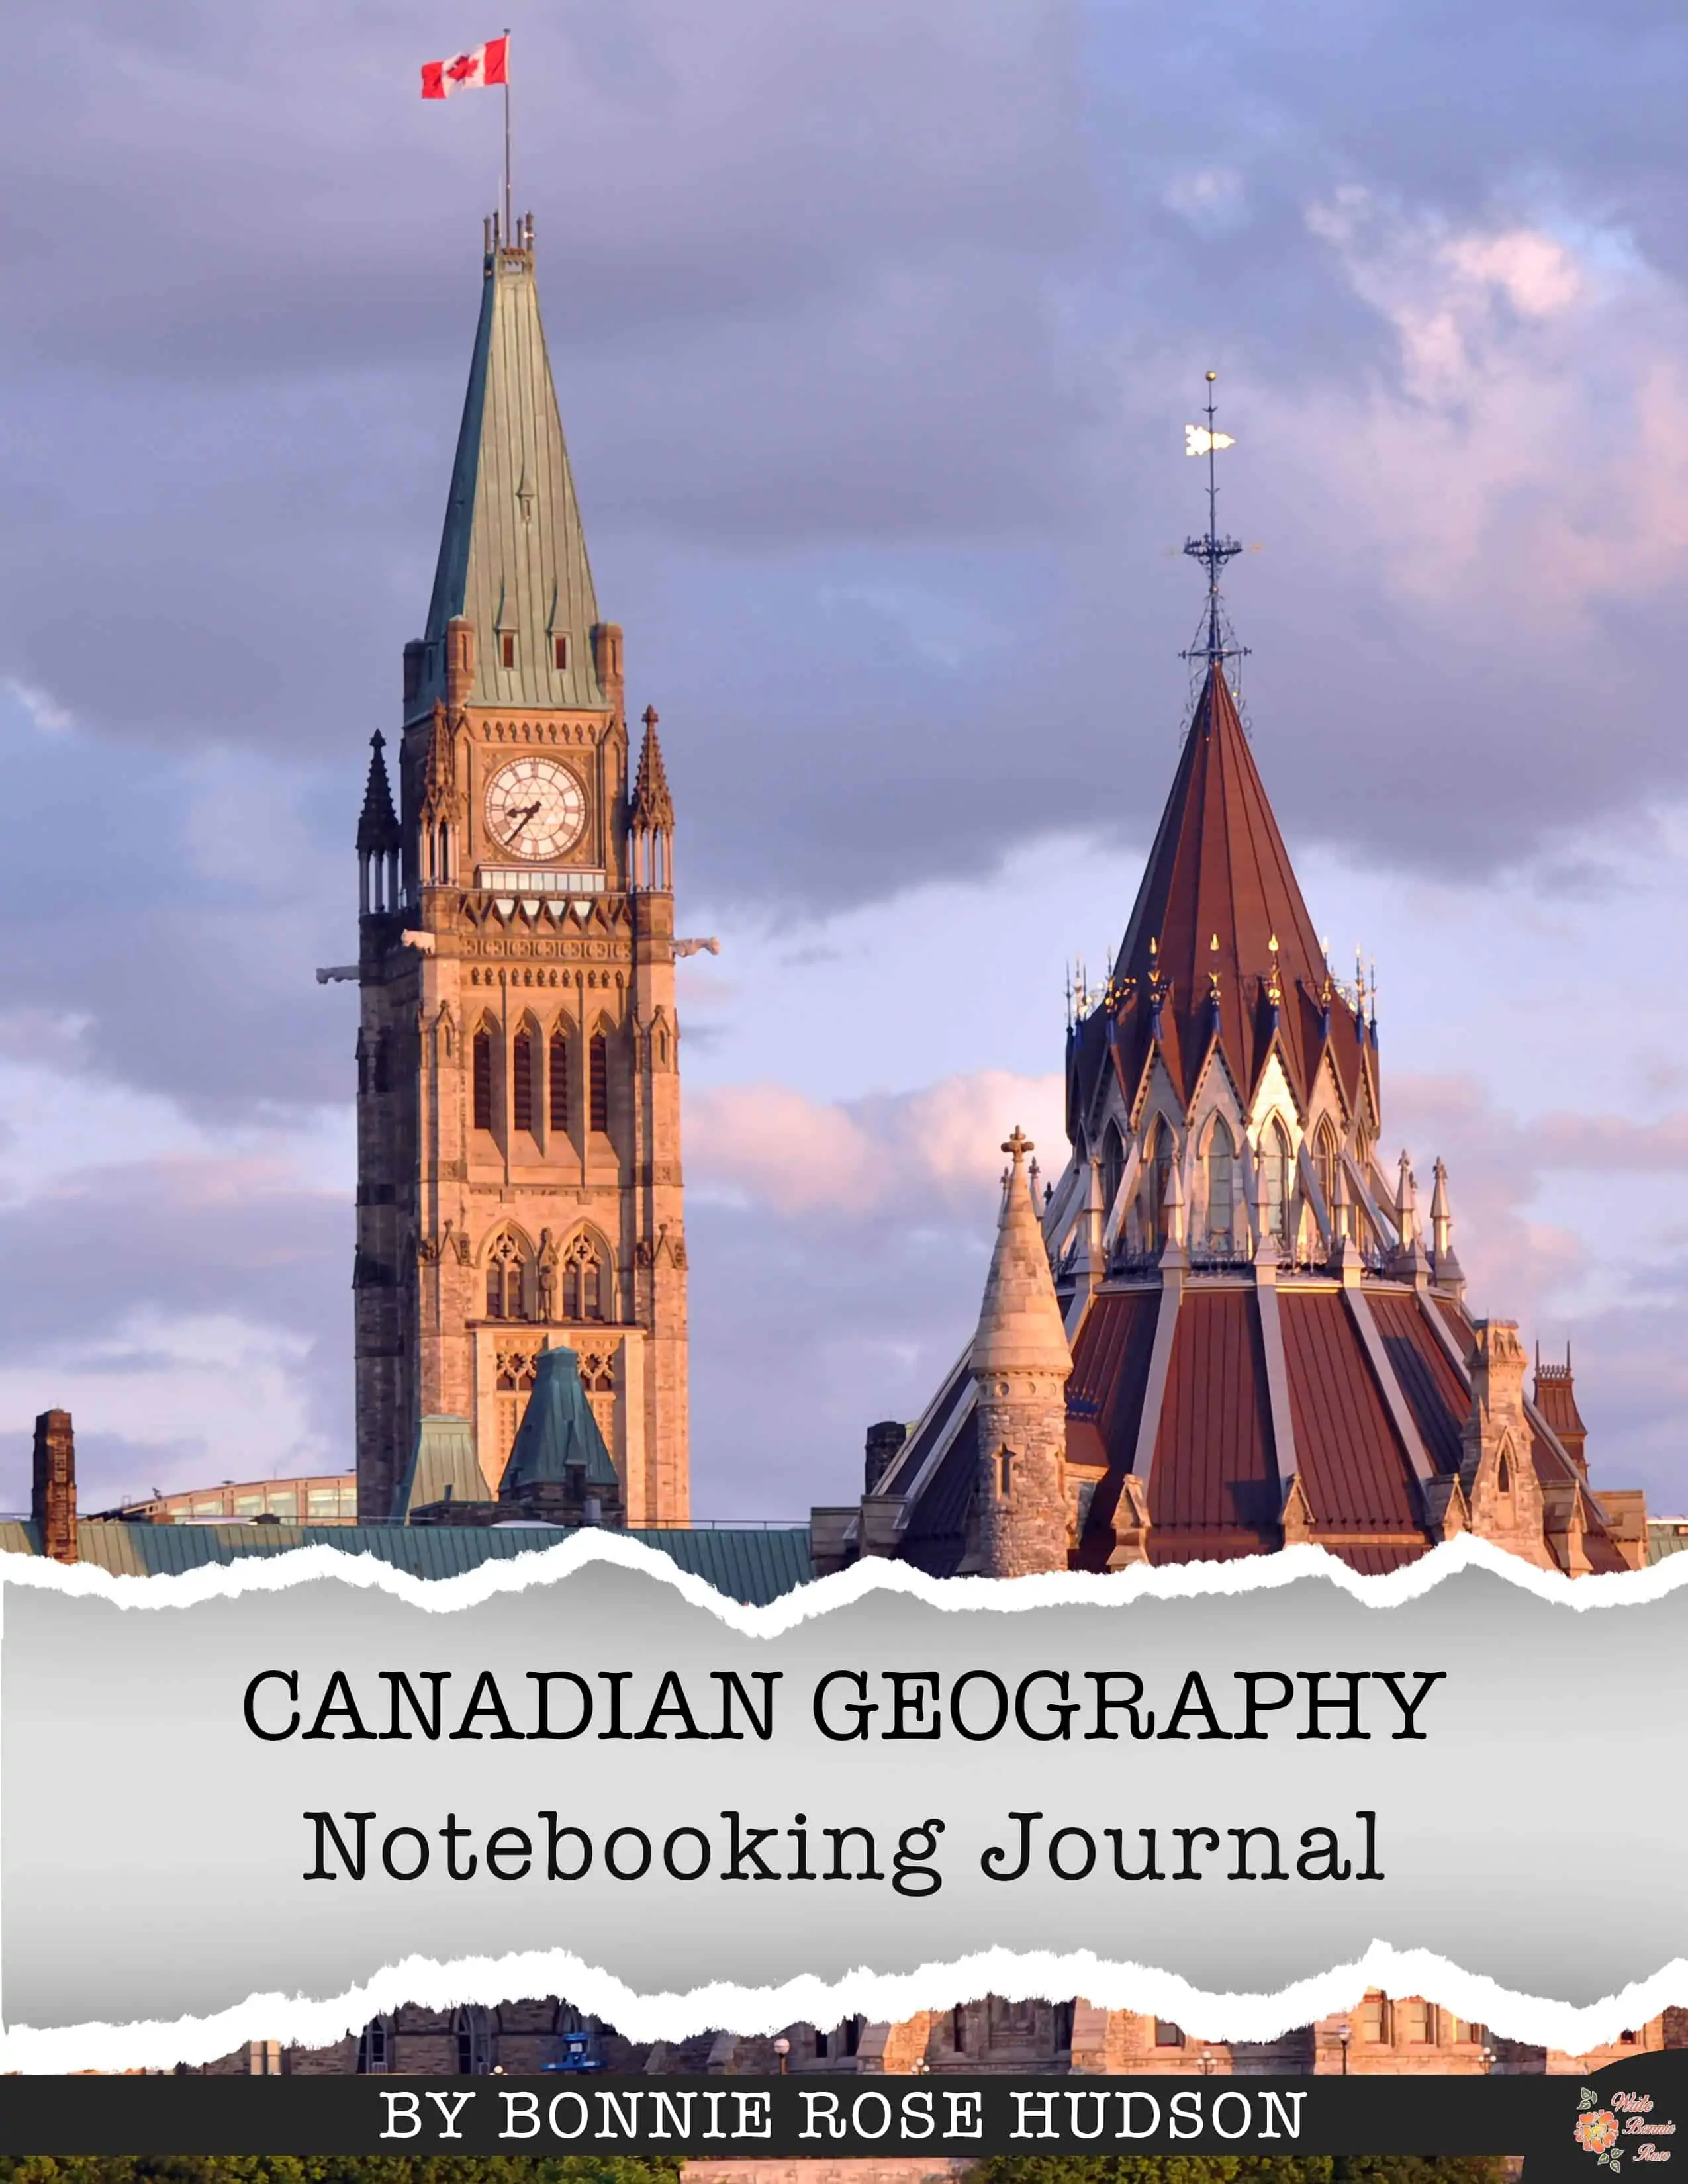 Canadian Geography Notebooking Journal